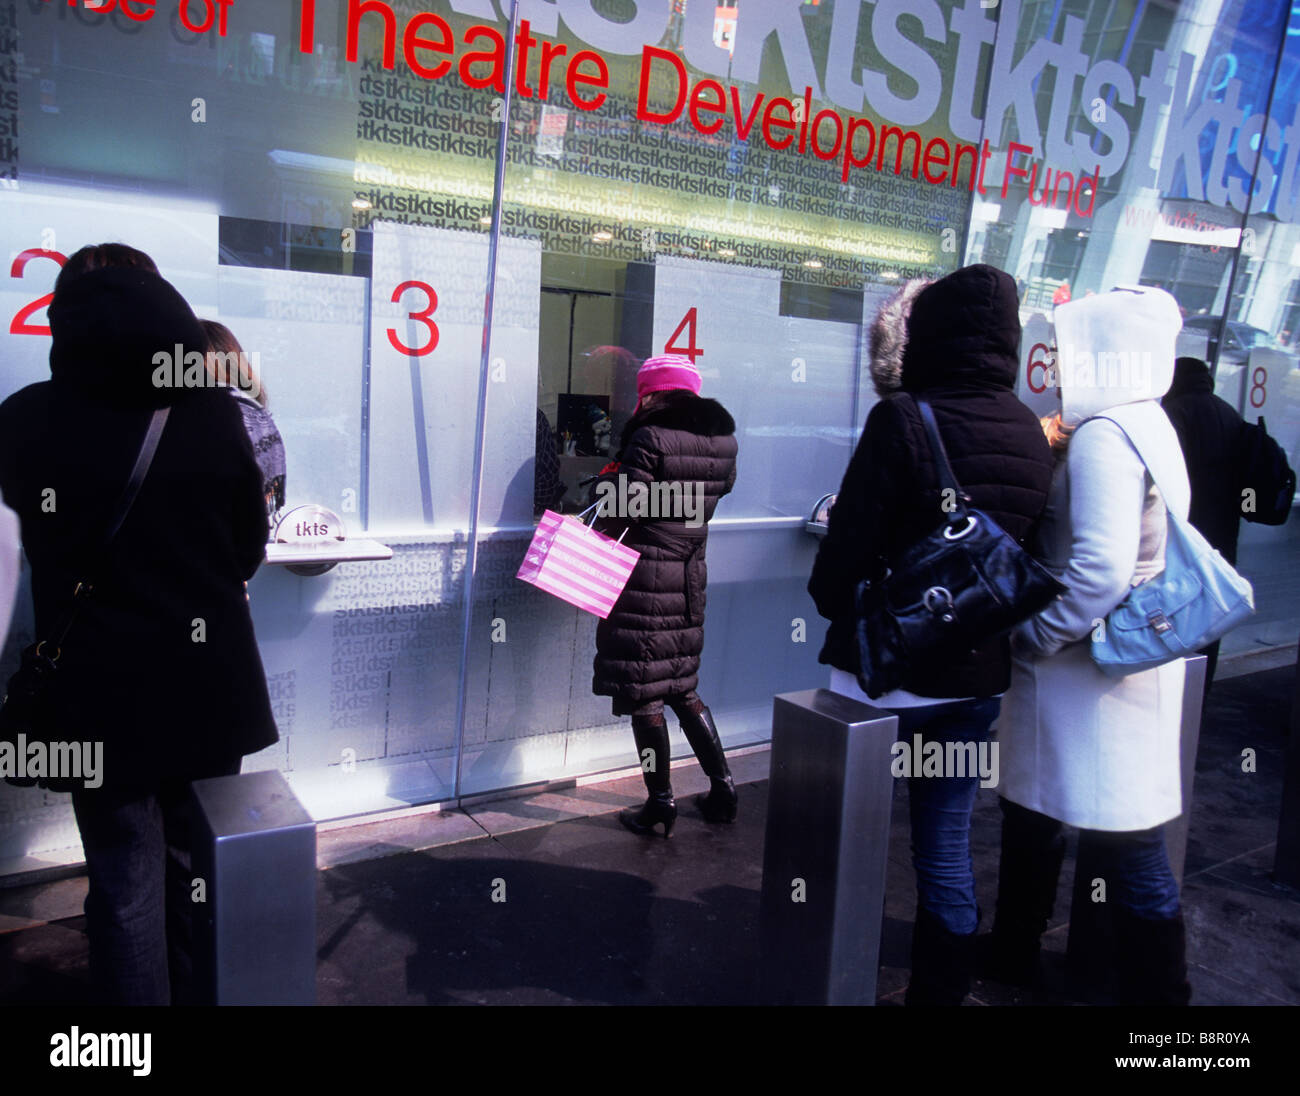 TKTS Theatre ticket booth New York City Broadway and Times Square. Duffy Square. People buying discount theater tickets. Entertainment box office USA Stock Photo